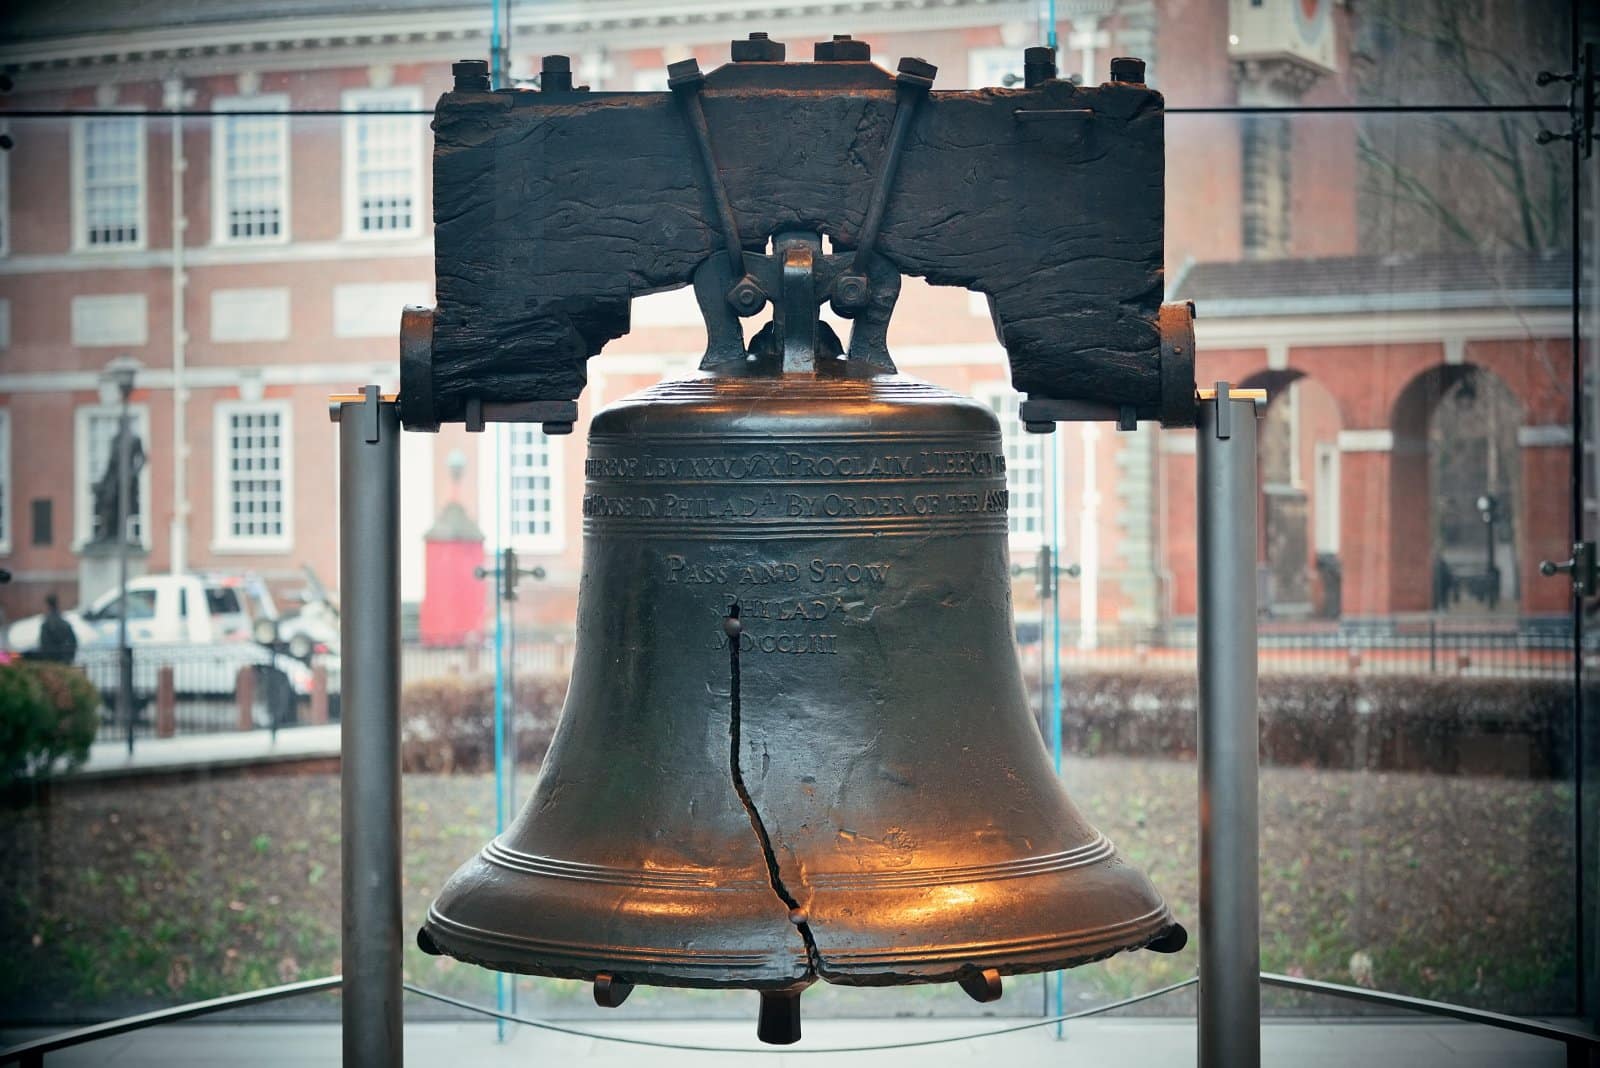 <p class="wp-caption-text">Image Credit: Shutterstock / Songquan Deng</p>  <p>While primarily known as the birthplace of the United States, Independence Hall also has a military history as the meeting place of the Second Continental Congress, which managed the Colonial war effort during the American Revolution.</p>